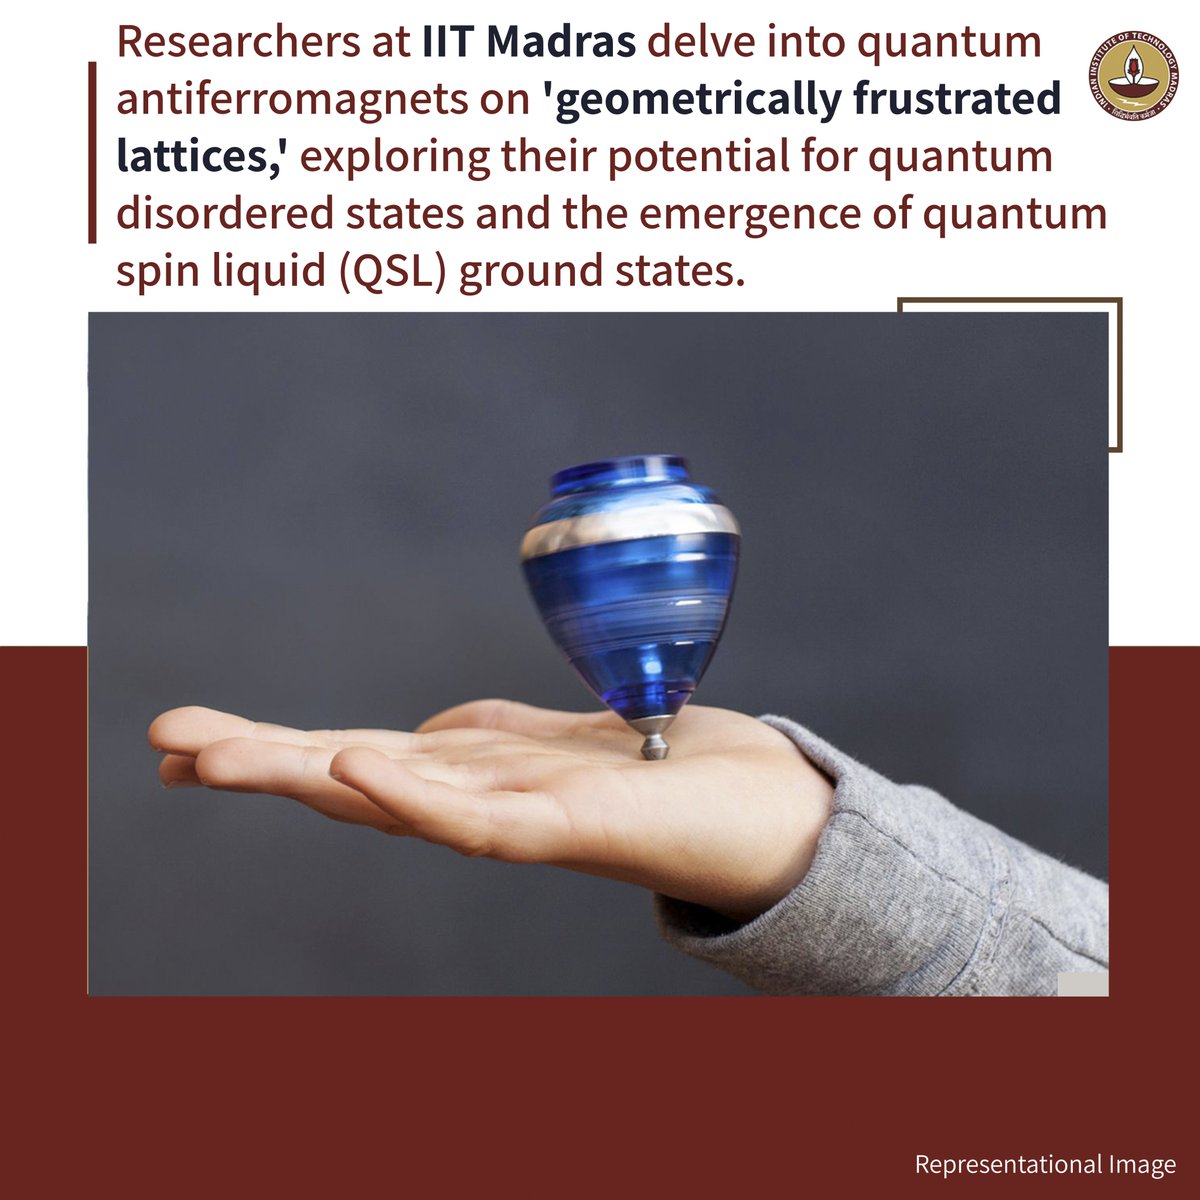 #techtuesday Researchers at @iitmadras with peers from @UniCologne discuss 'Quantum antiferromagnets' on geometrically frustrated lattices in the formation of quantum disordered states & the possible emergence of quantum spin liquid ground states.
Read: tech-talk.iitm.ac.in/a-quantum-spin/